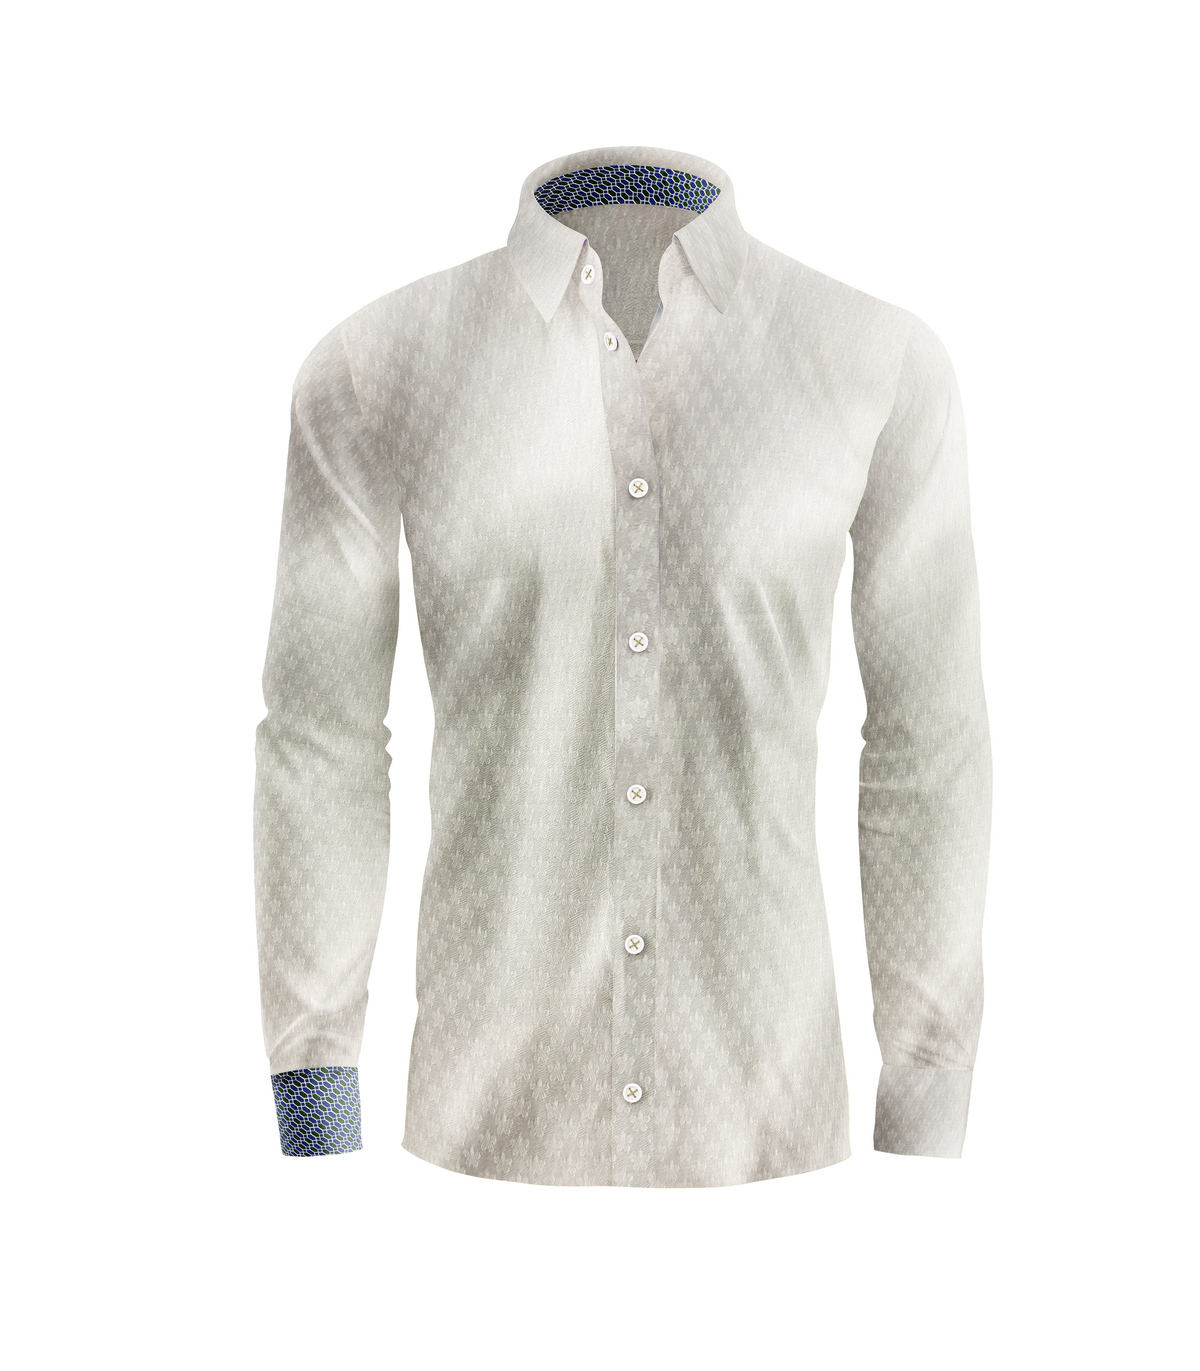 Vercini Signature Geometric Cotton Shirt Collection - Available in White, Sky Blue, and Navy